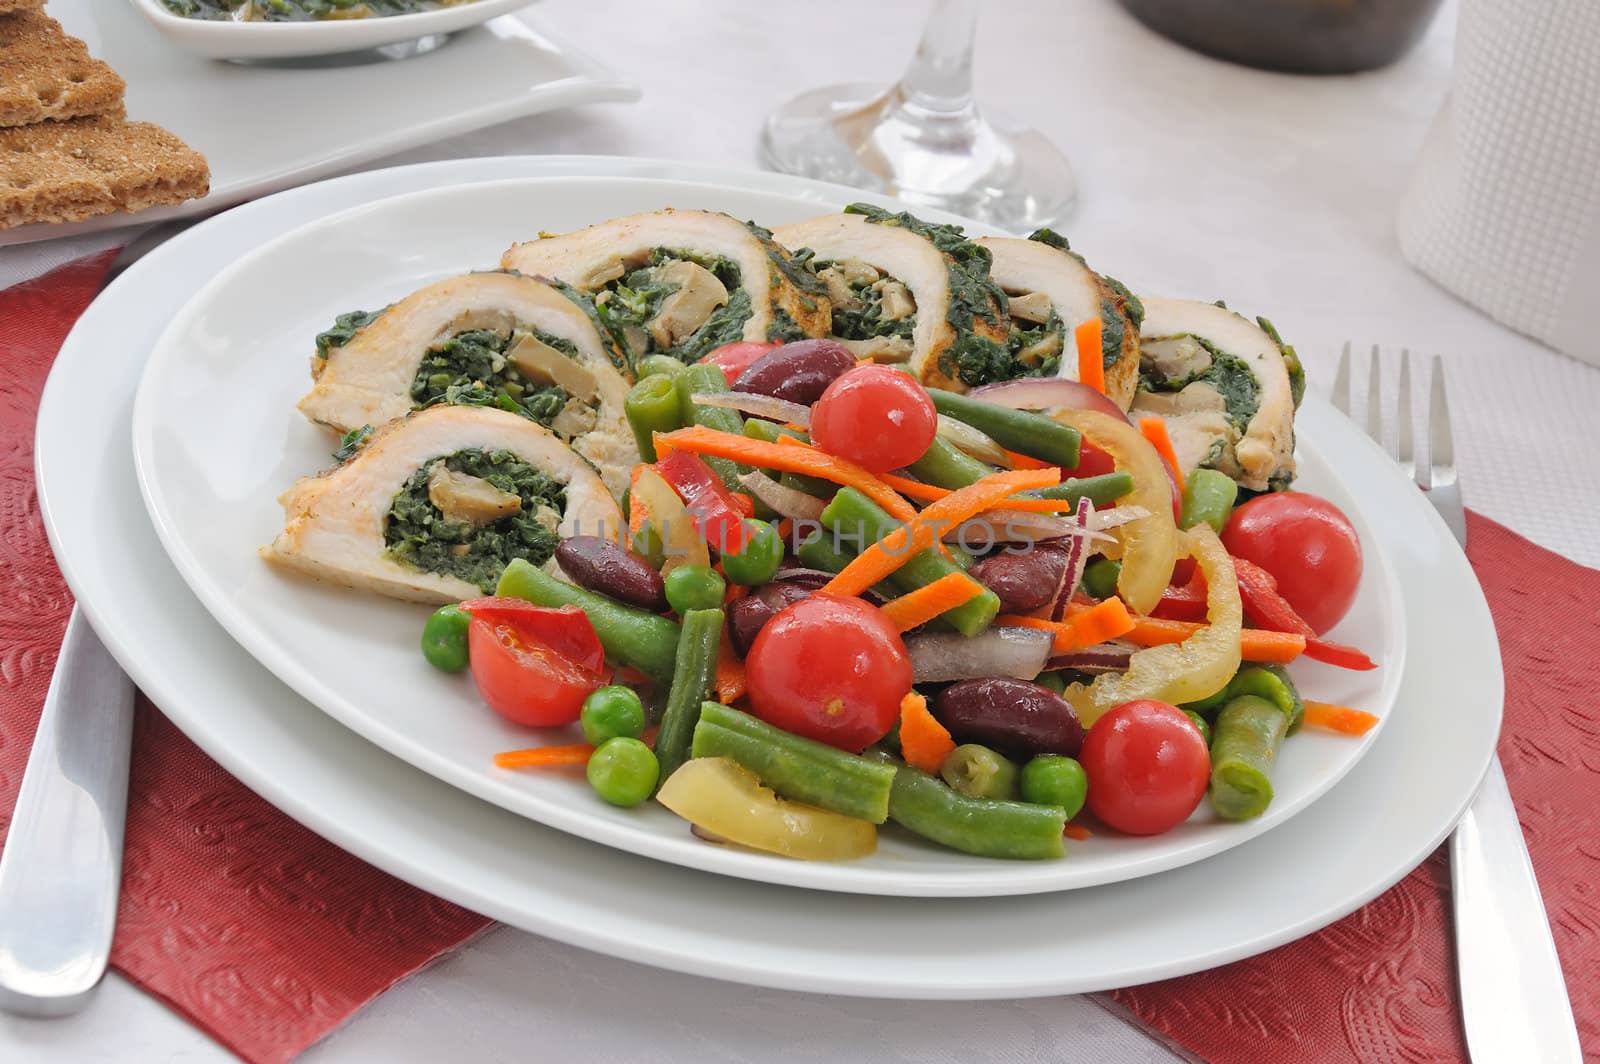 Chicken roulade with spinach and mushrooms with vegetables by Apolonia